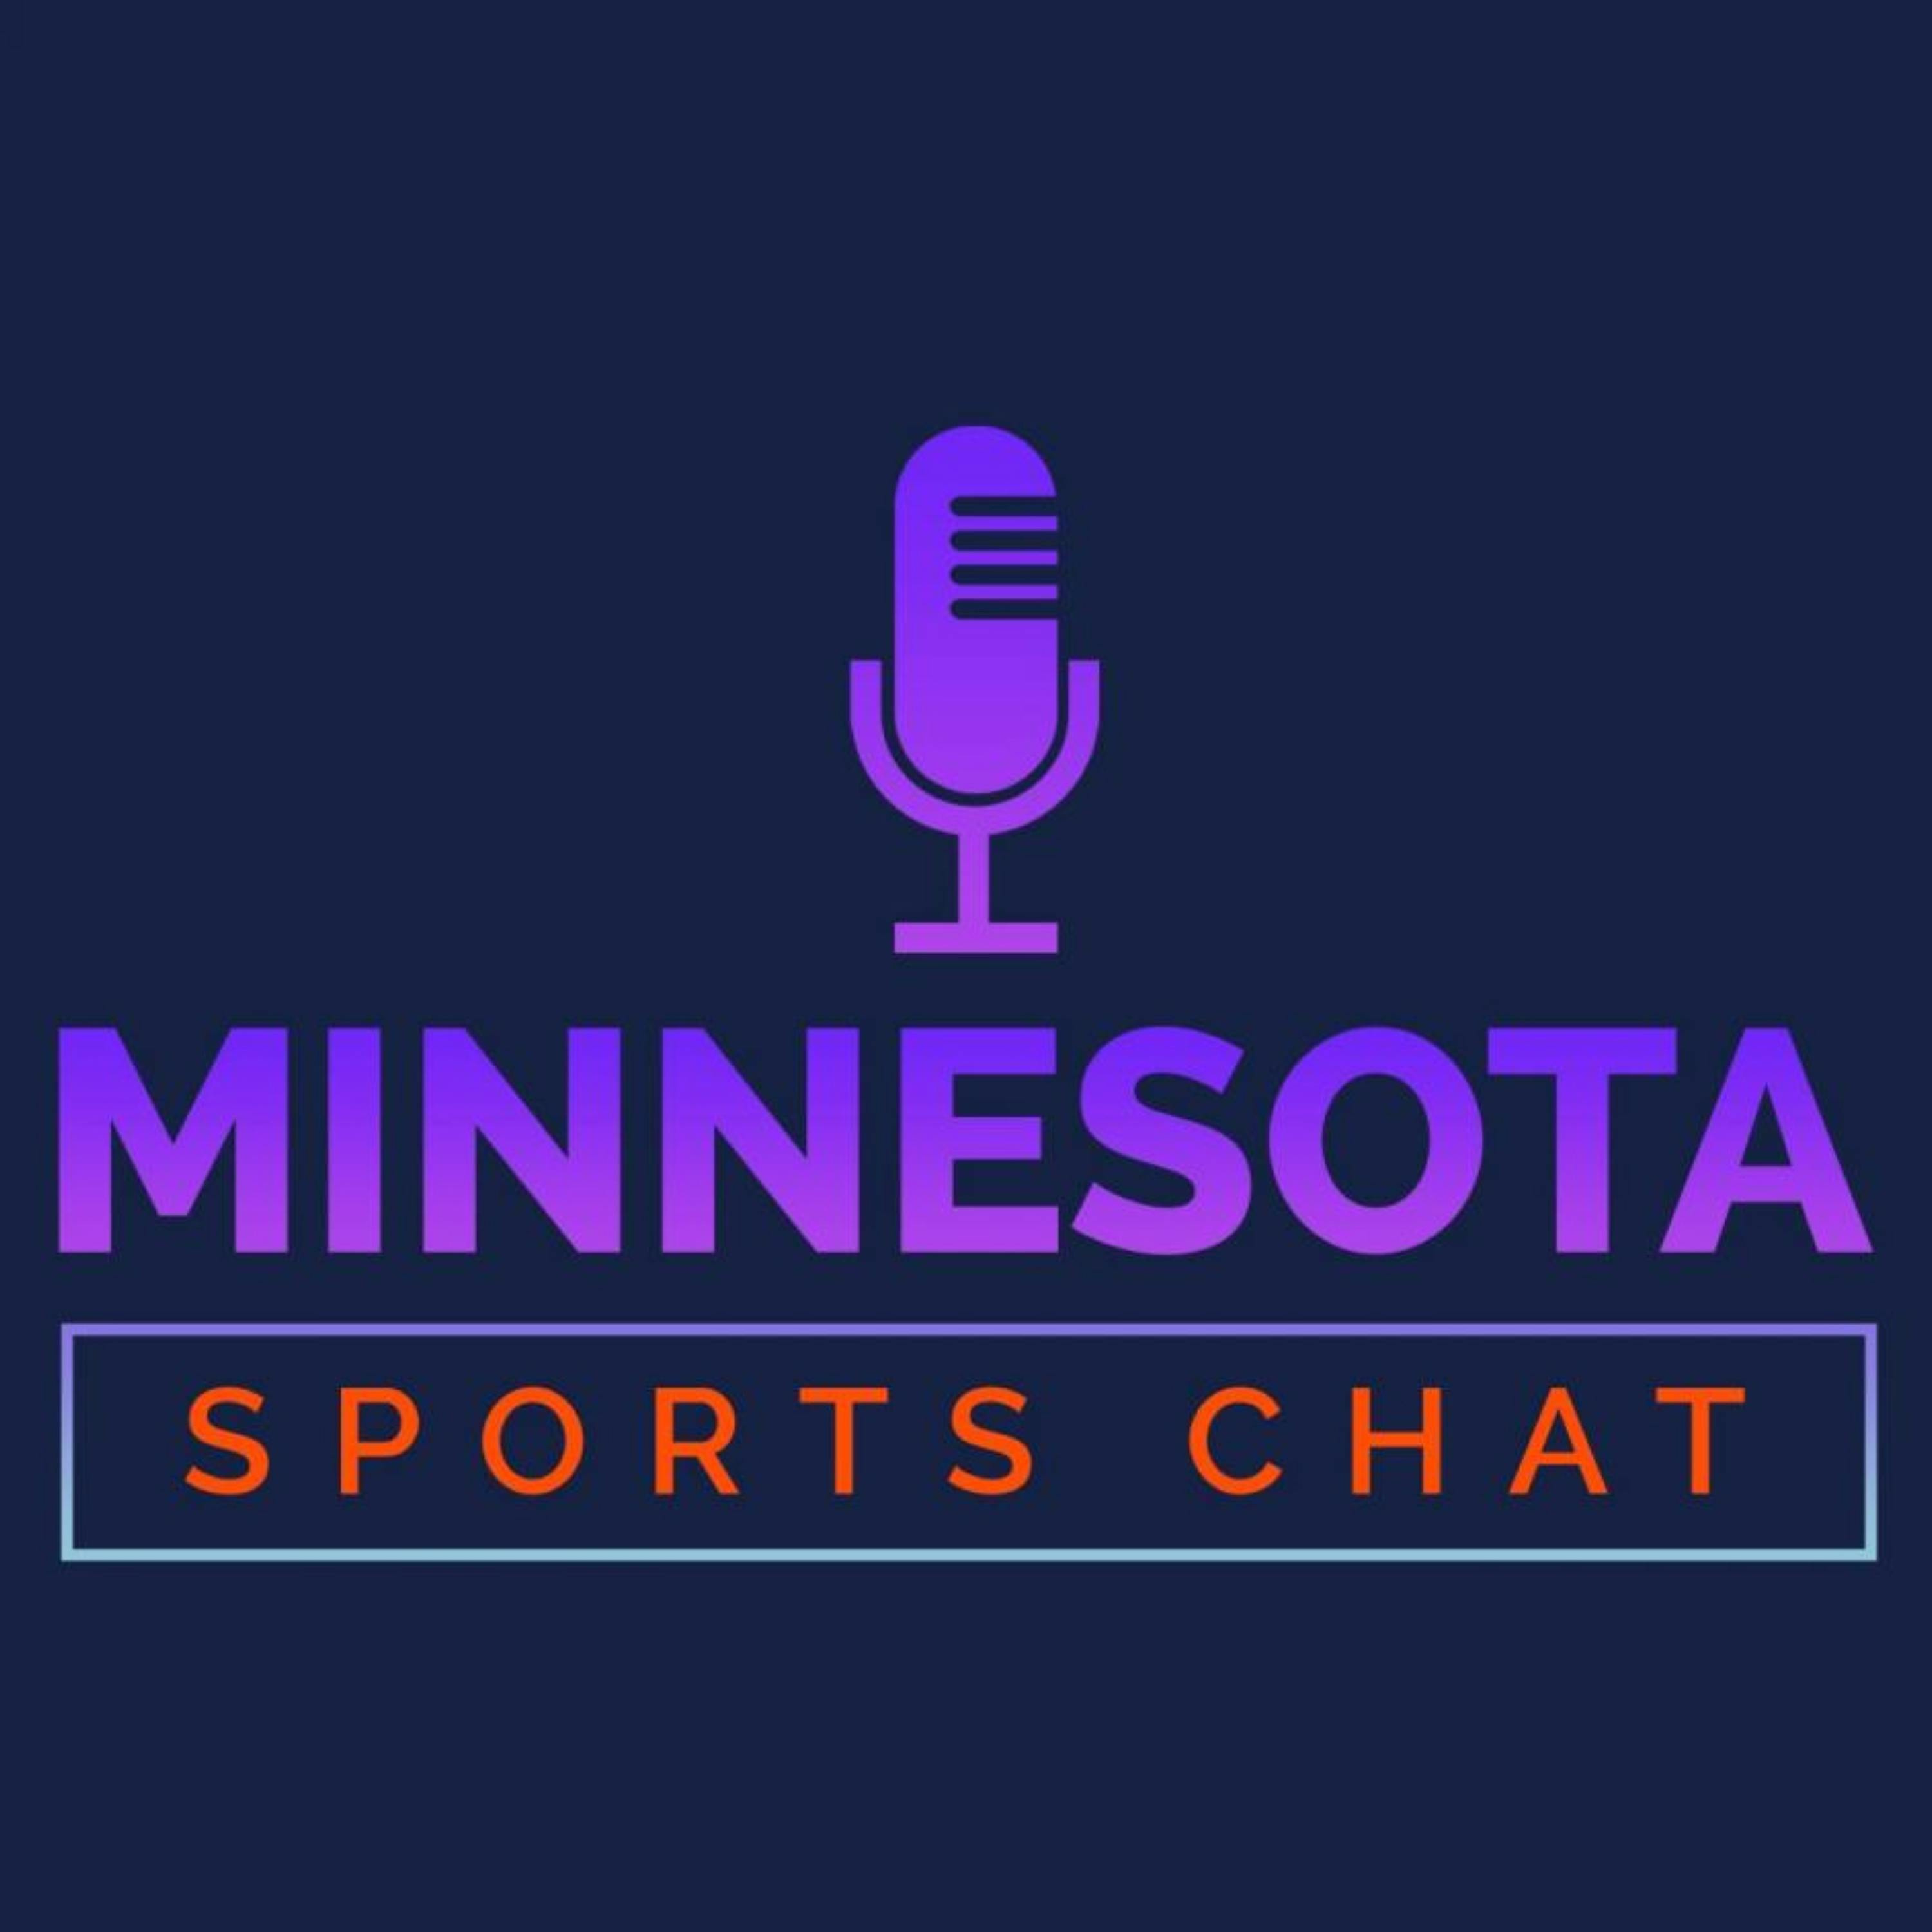 MINNESOTA SPORTS CHAT: Minnesota Gophers Frozen 4 Preview - Edition #161